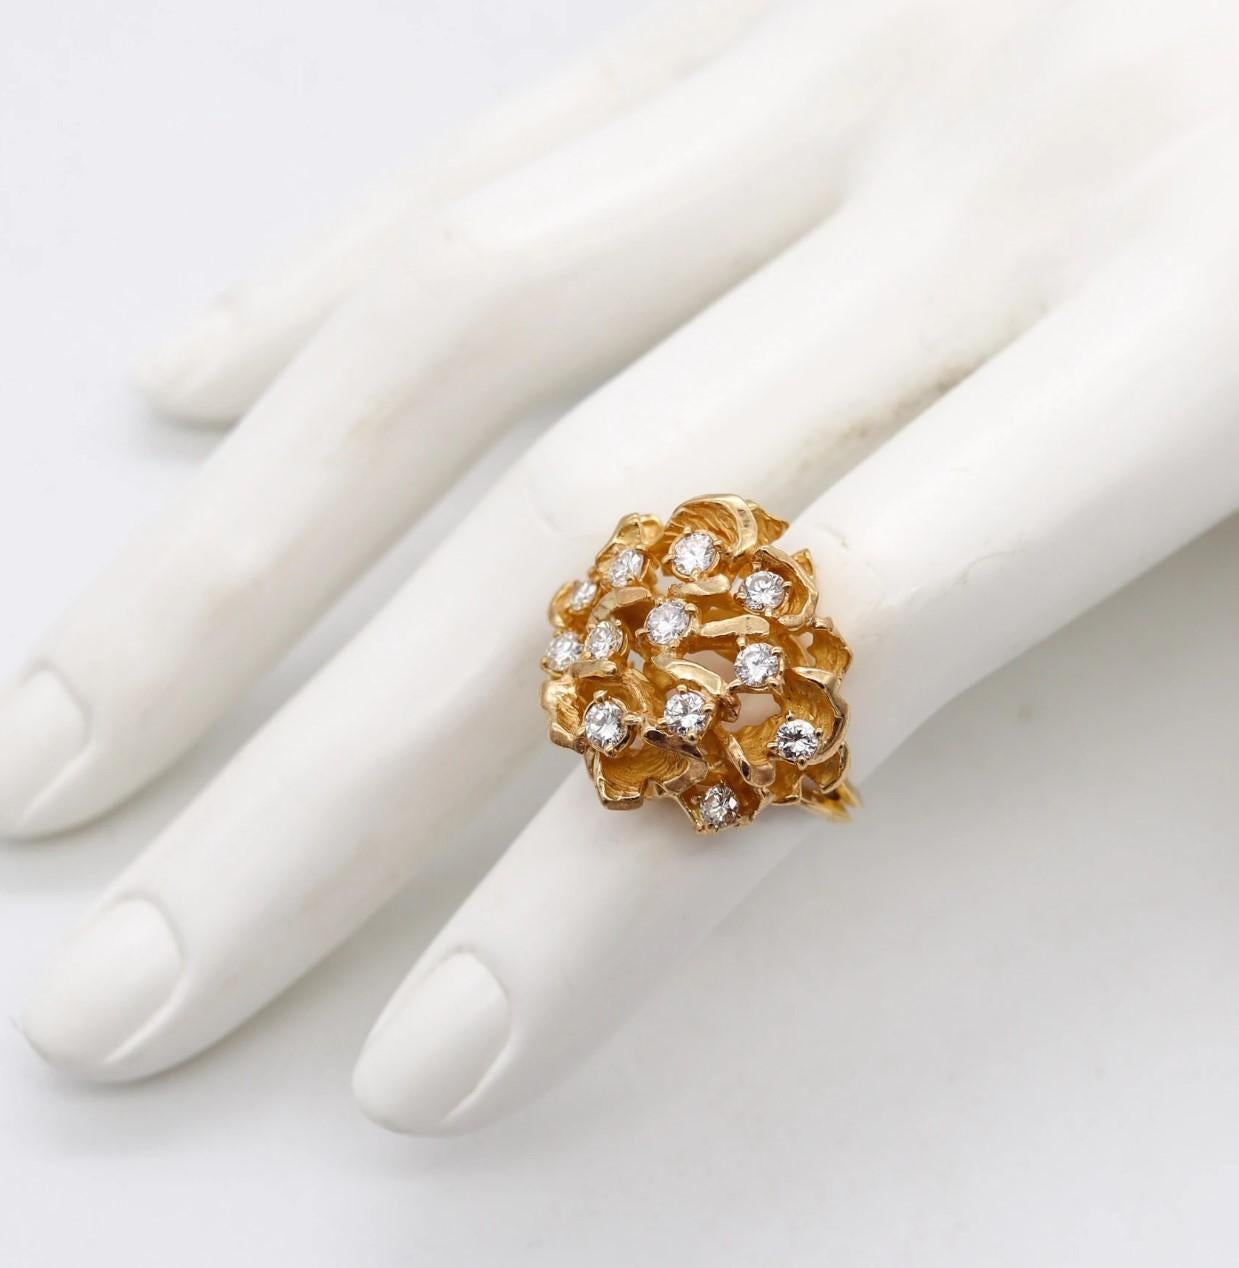 Boucheron Paris 1950 Rare Suite of Earrings & Ring 18Kt Gold 2.16 Ctw Diamonds In Good Condition For Sale In Miami, FL